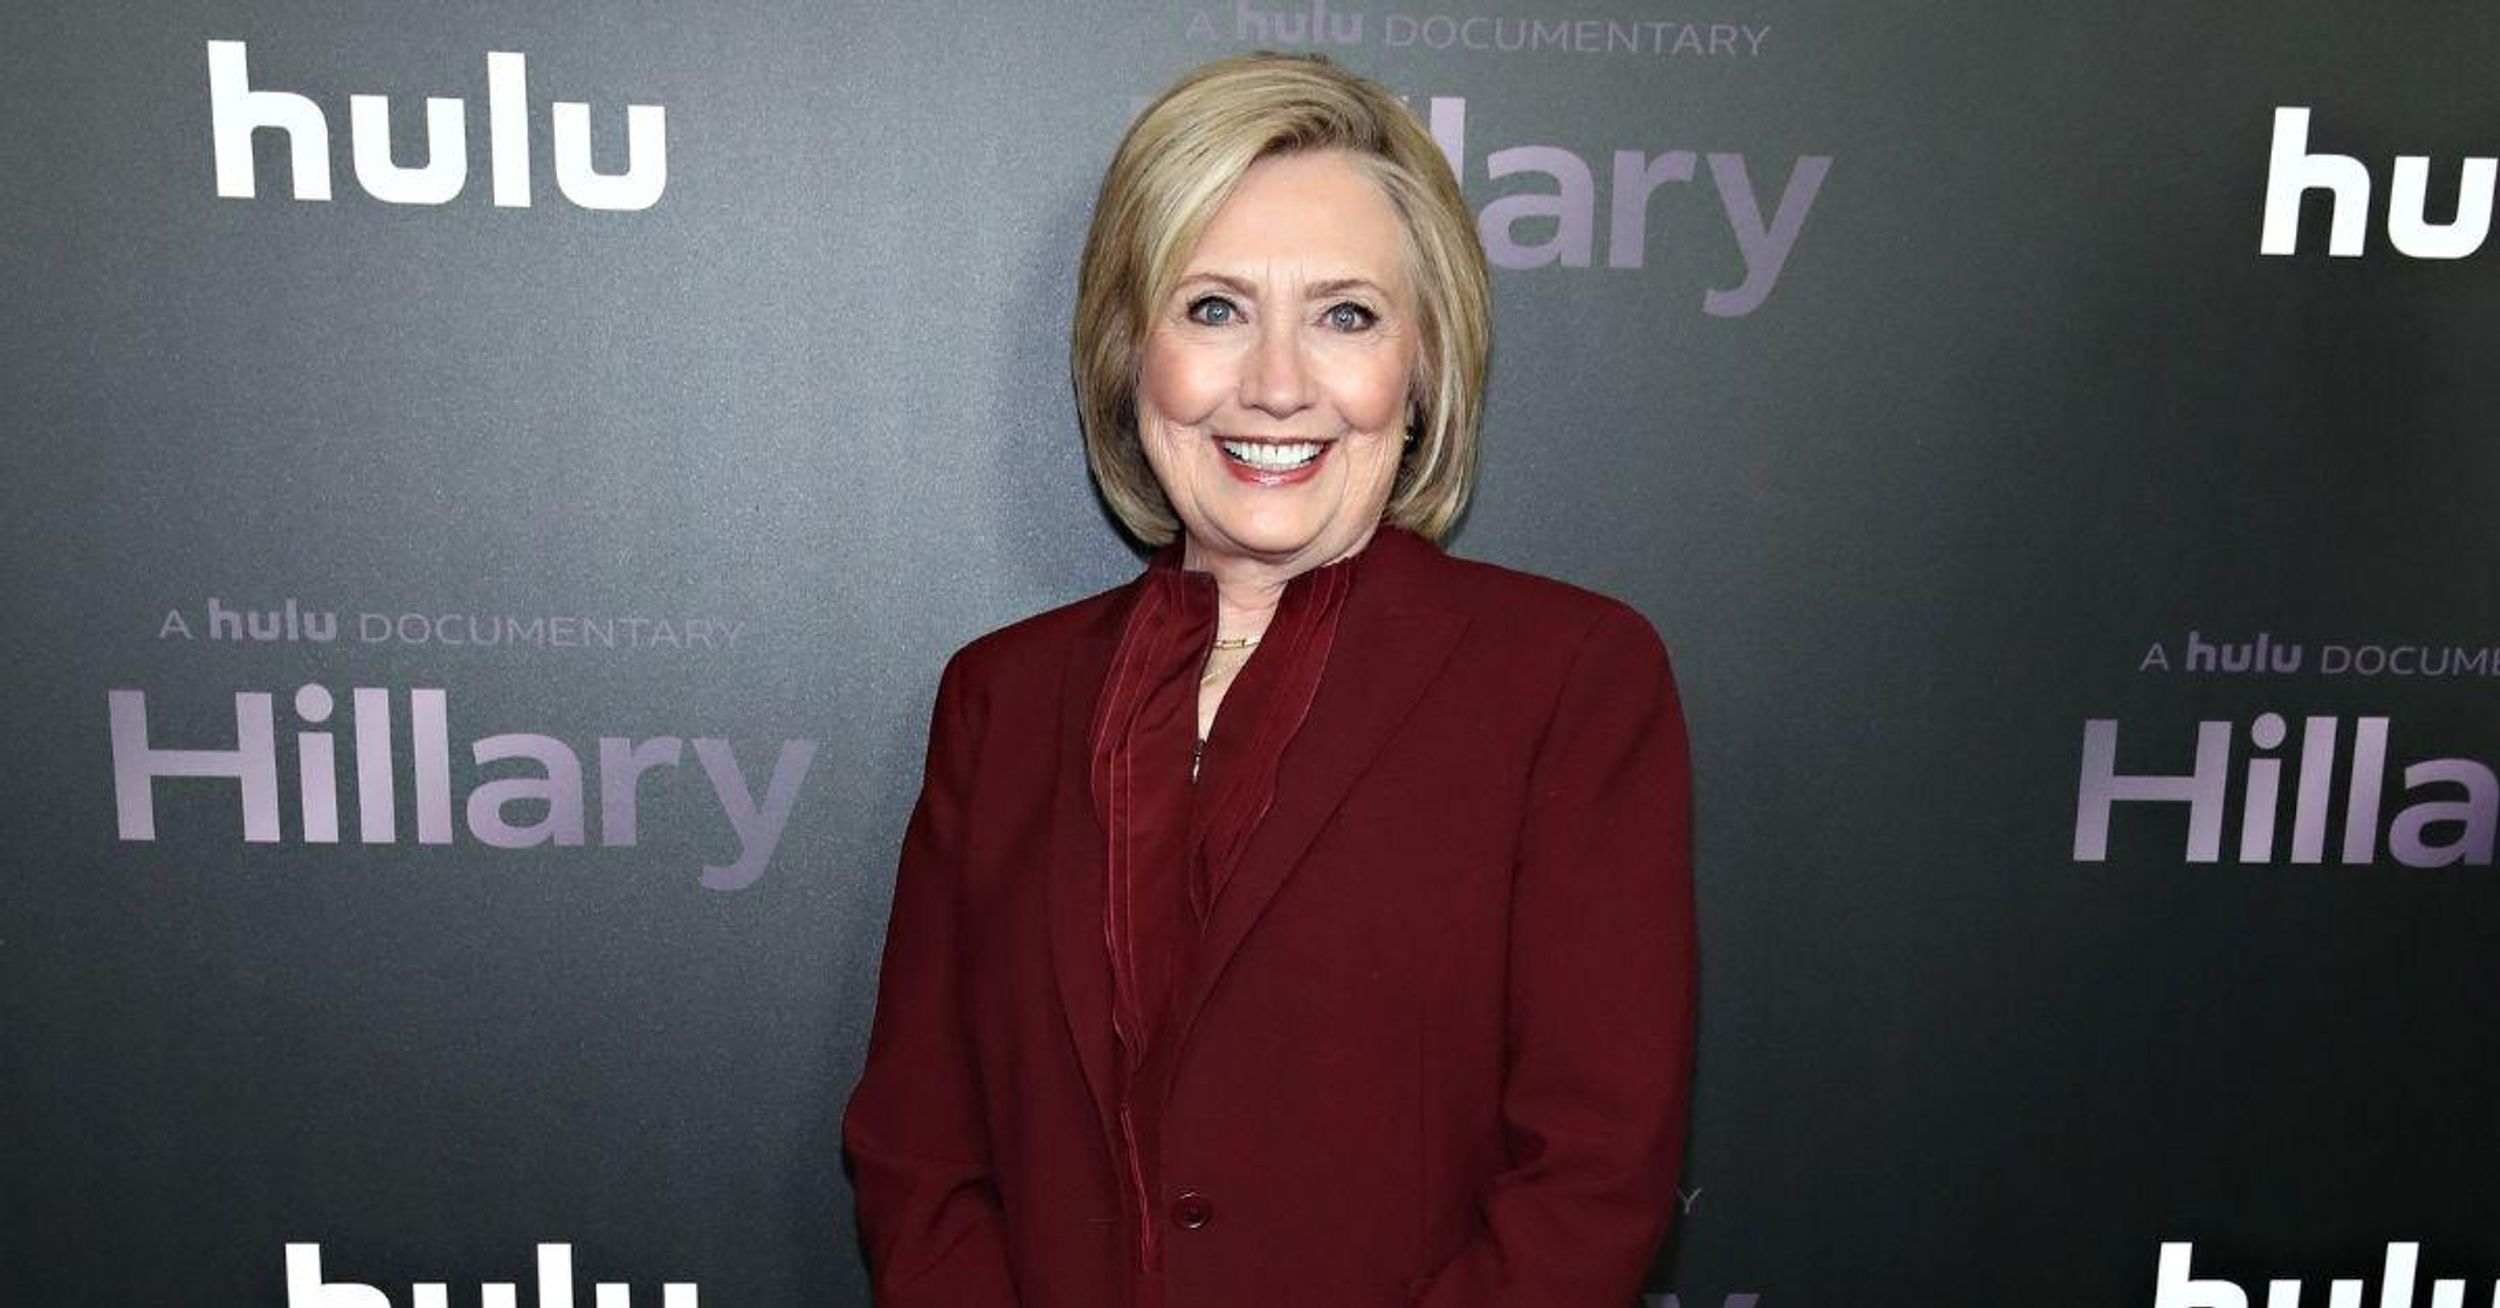 Hillary Clinton Perfectly Dismisses Tabloid Story Criticizing Her For Dining At 'Posh' Restaurant With Friends